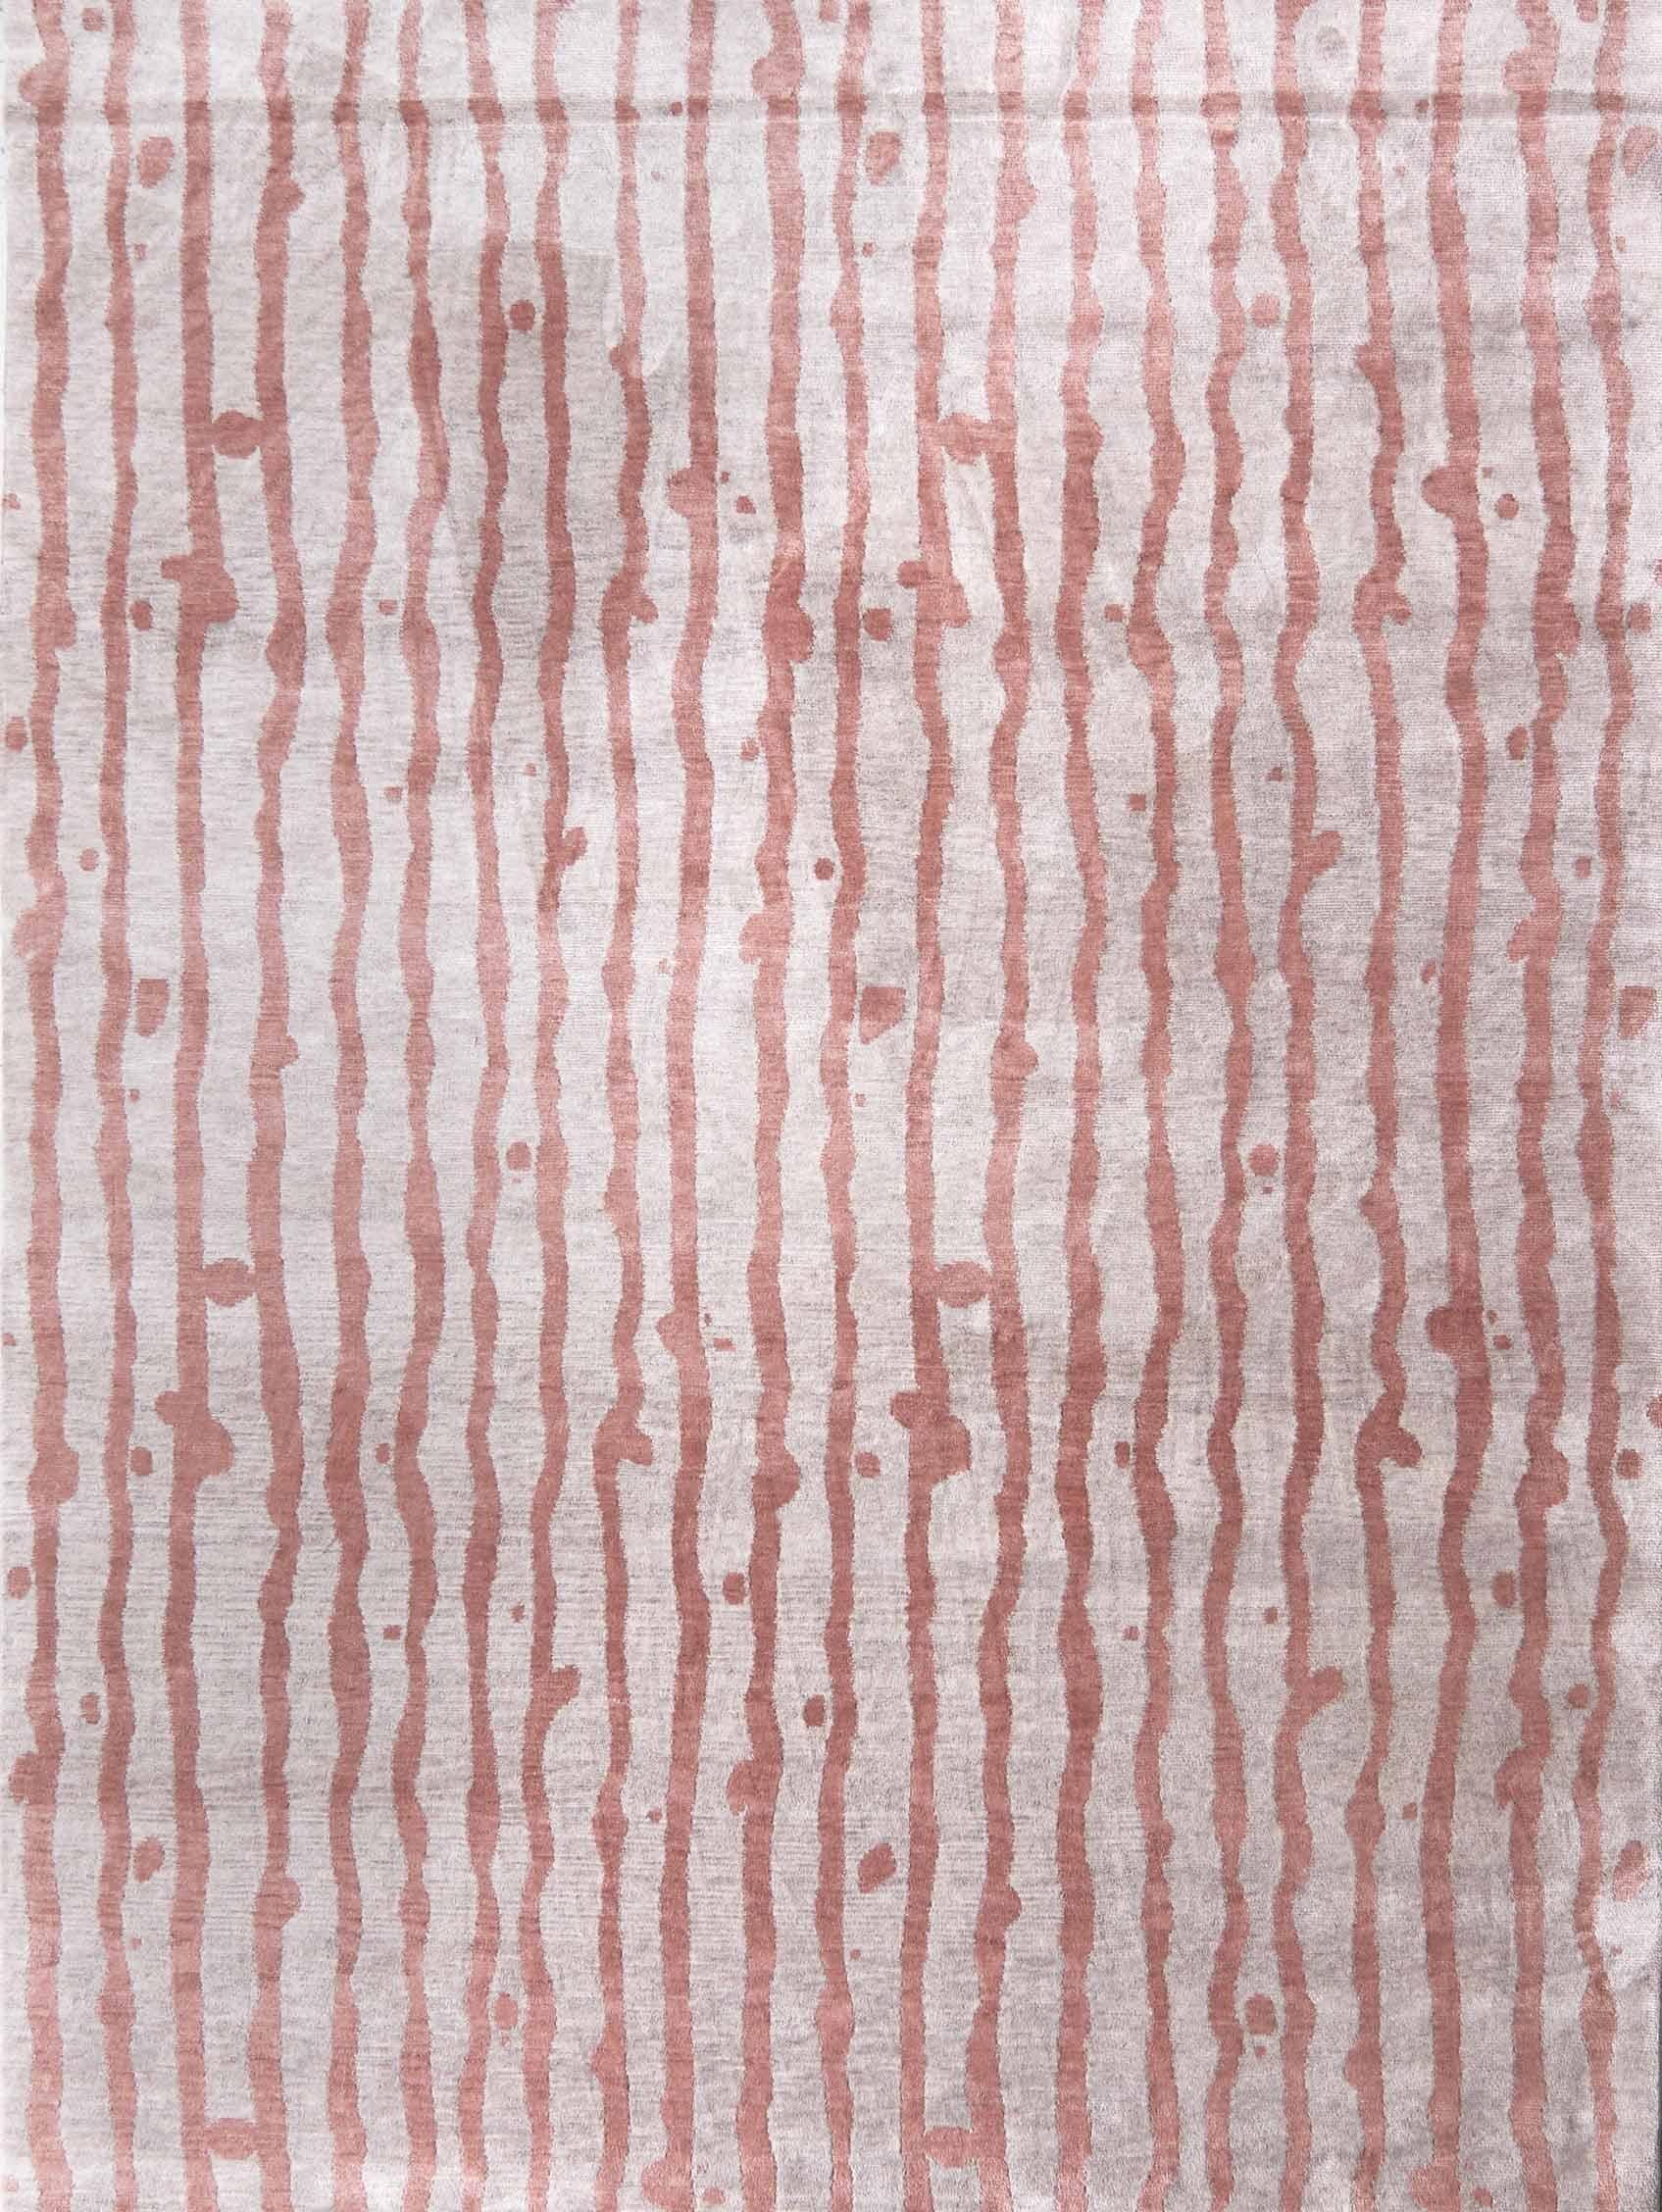 Drippy Stripe Sienna hand knotted rug by Eskayel
Dimensions: D 6' x H 9'
Pile Height: 6 mm
Materials: 100% Merino wool.

Eskayel hand knotted rugs are woven to order and can be customized in various sizes, colors, materials, and weave